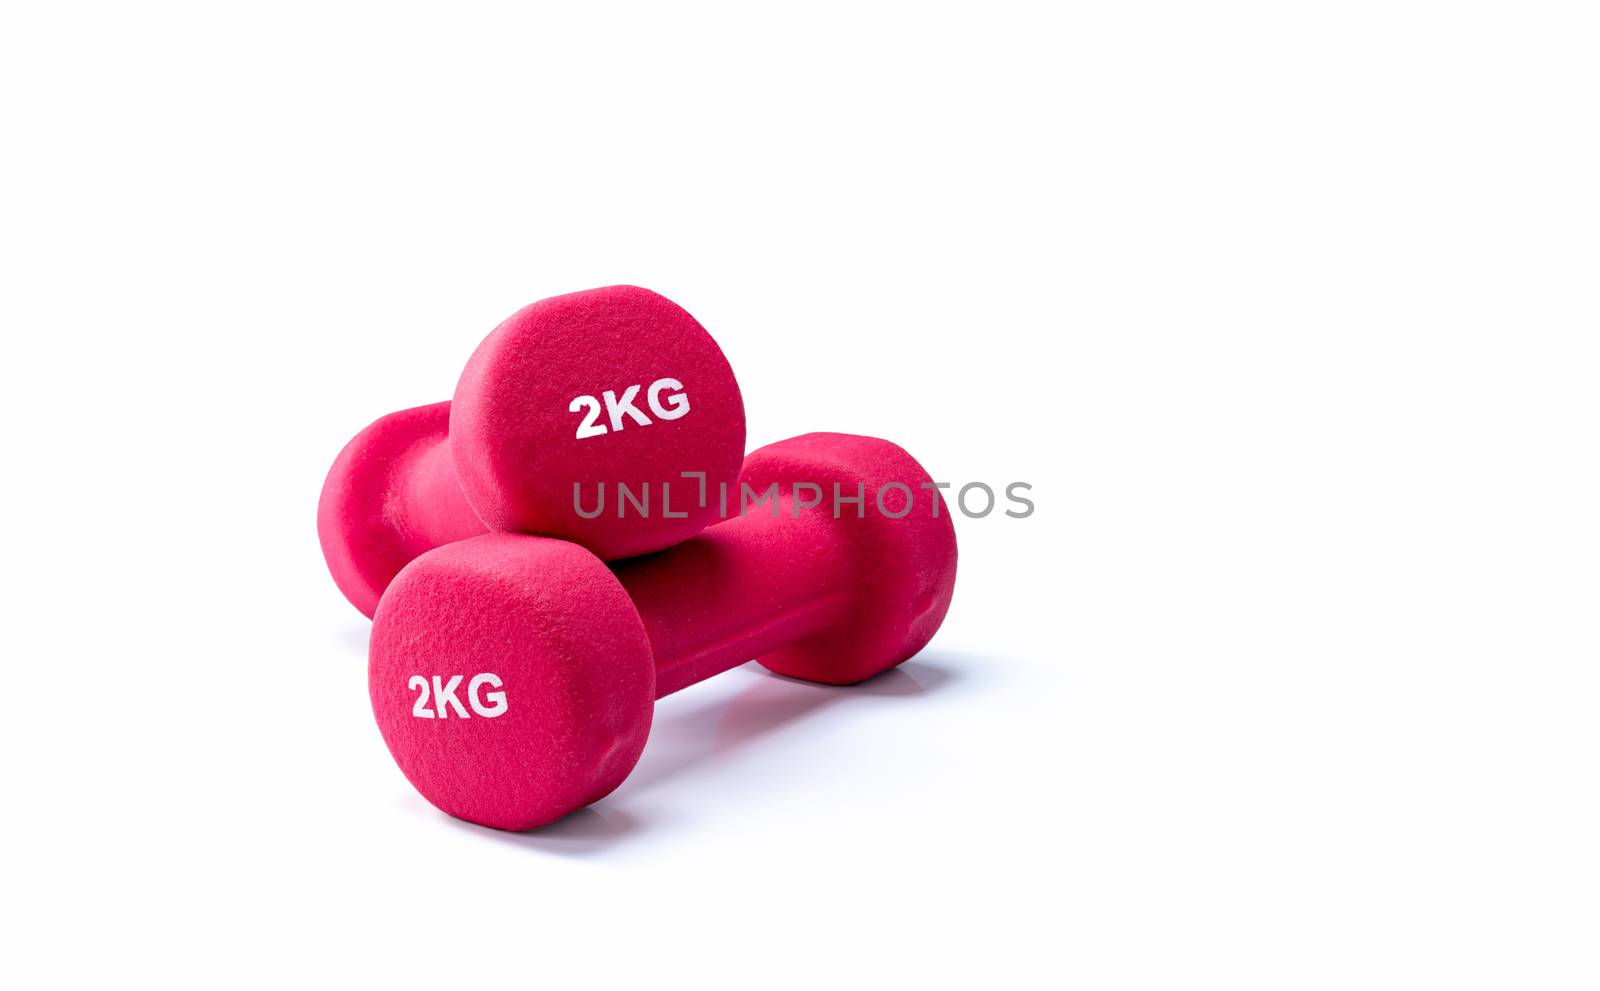 Set of red dumbbells isolated on white background. A pair of red neoprene dumbbells. Home gym equipment for exercise at home. Weight training equipment for sculpt arms, shoulders, back, and legs.